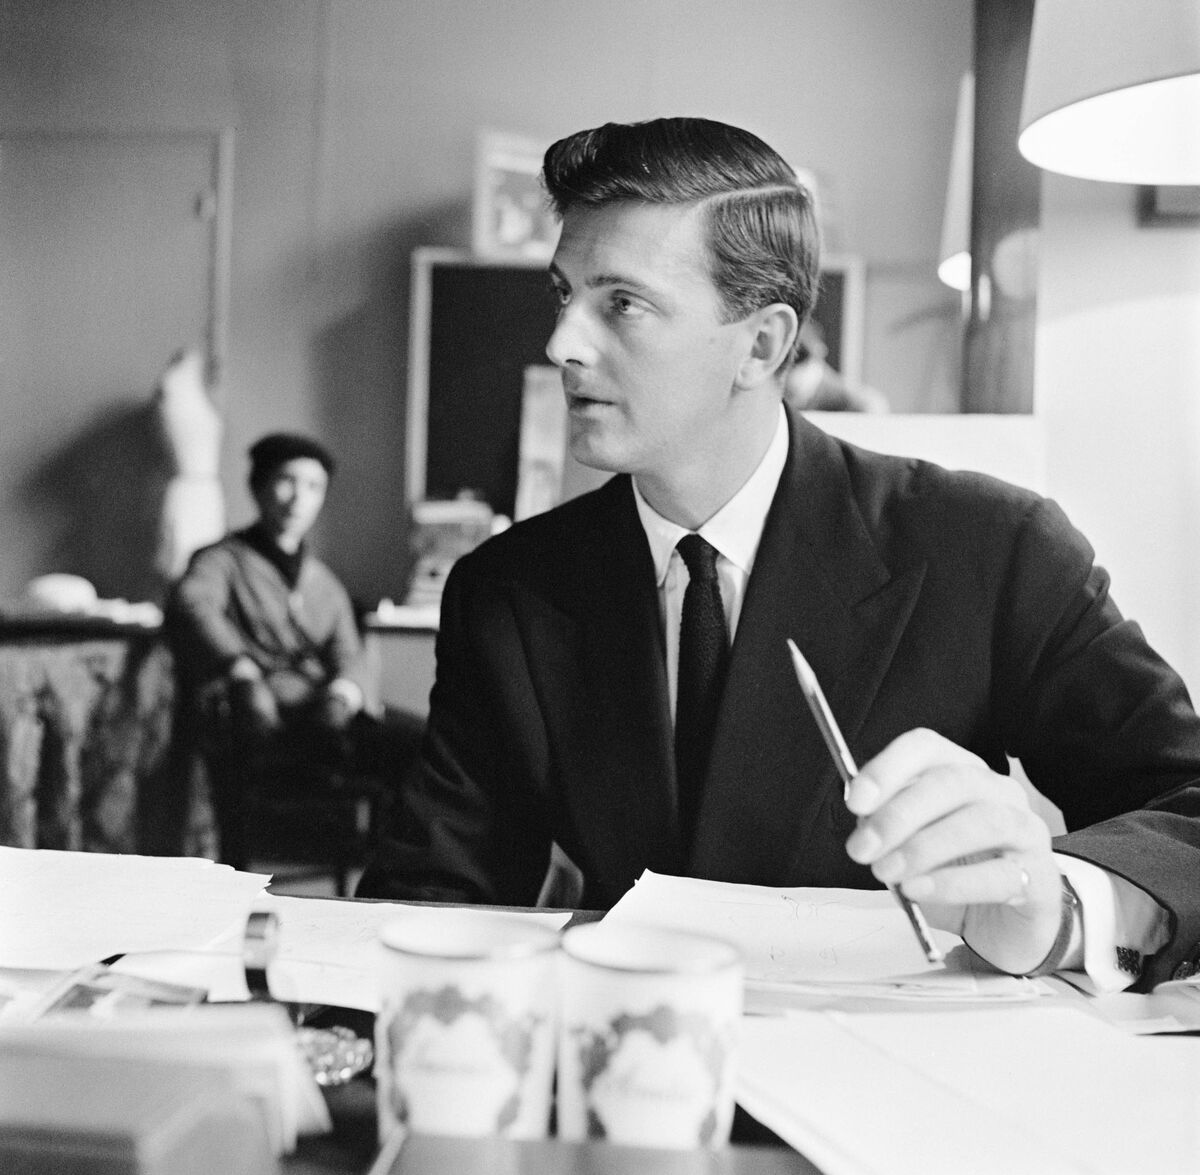 Hubert de Givenchy, French clothing designer who transformed